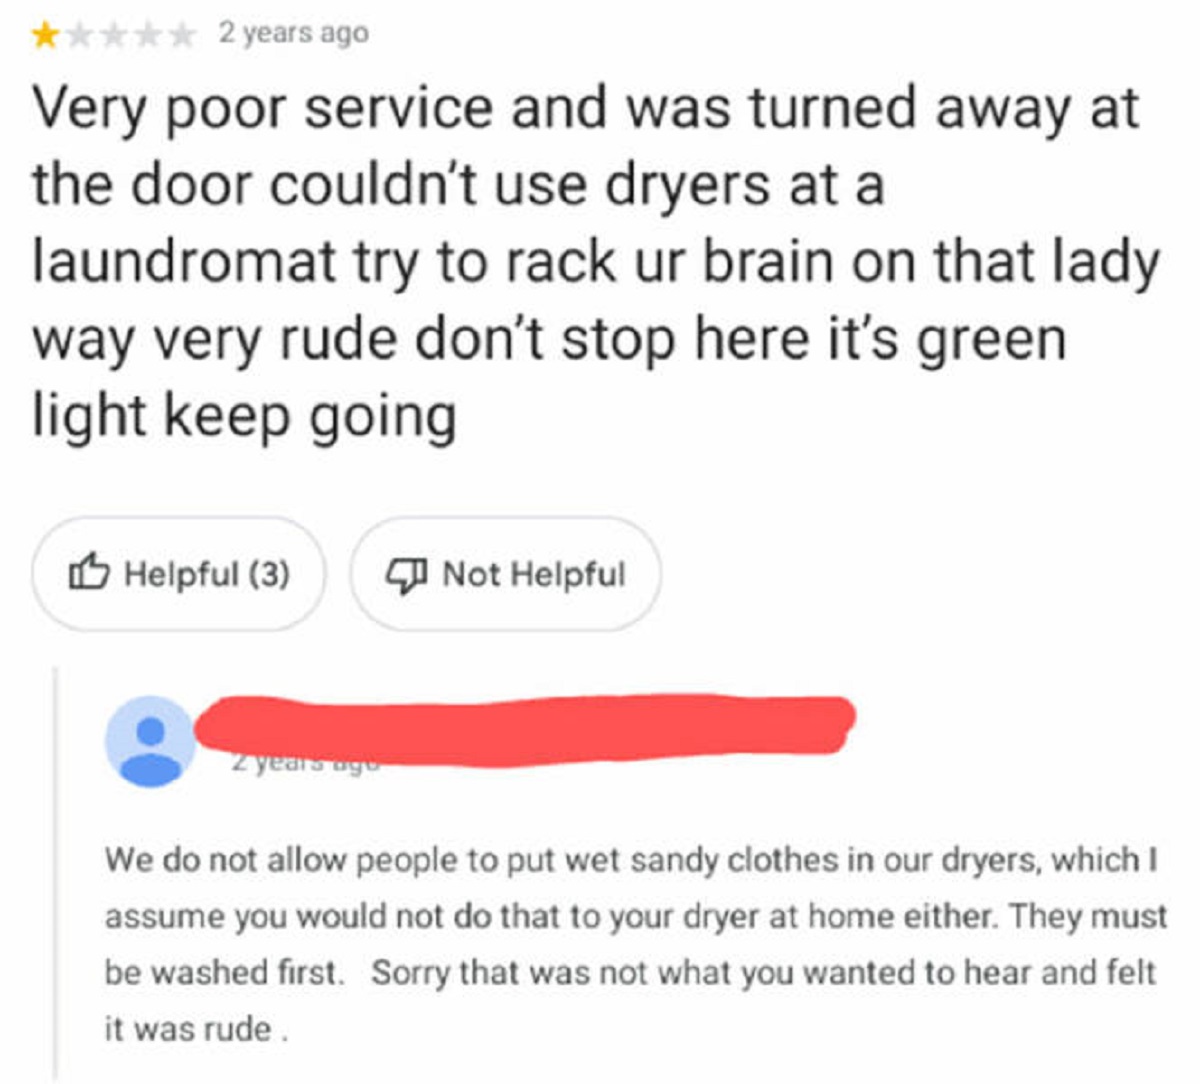 screenshot - 2 years ago Very poor service and was turned away at the door couldn't use dryers at a laundromat try to rack ur brain on that lady way very rude don't stop here it's green light keep going Helpful 3 Not Helpful 2 years ago We do not allow pe